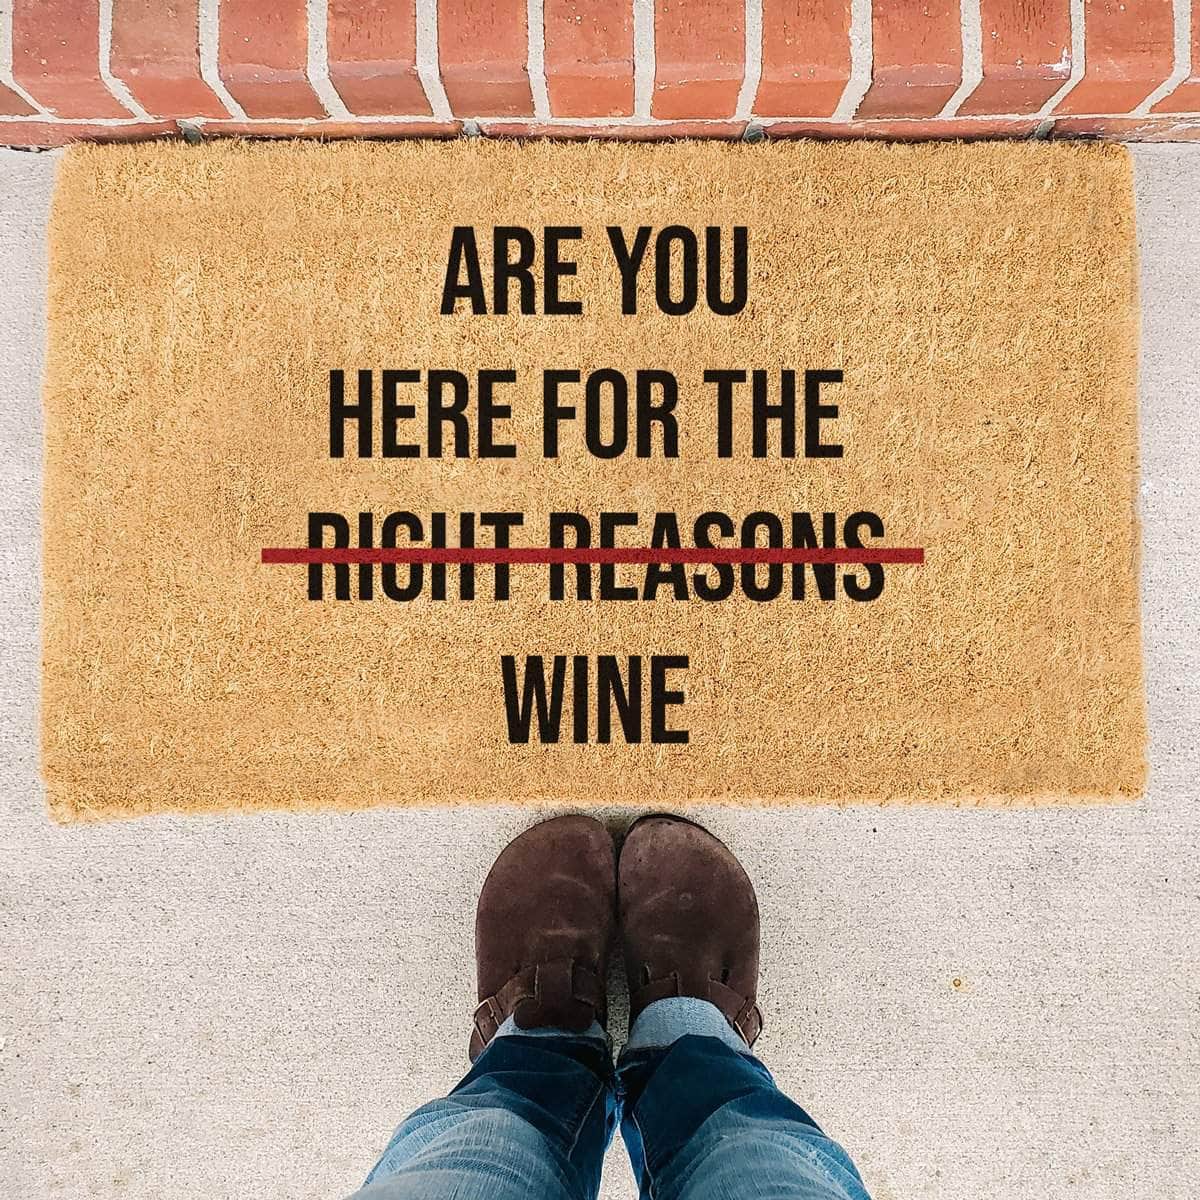 The Bachelor Here For The Right Reasons Wine - Funny Doormat